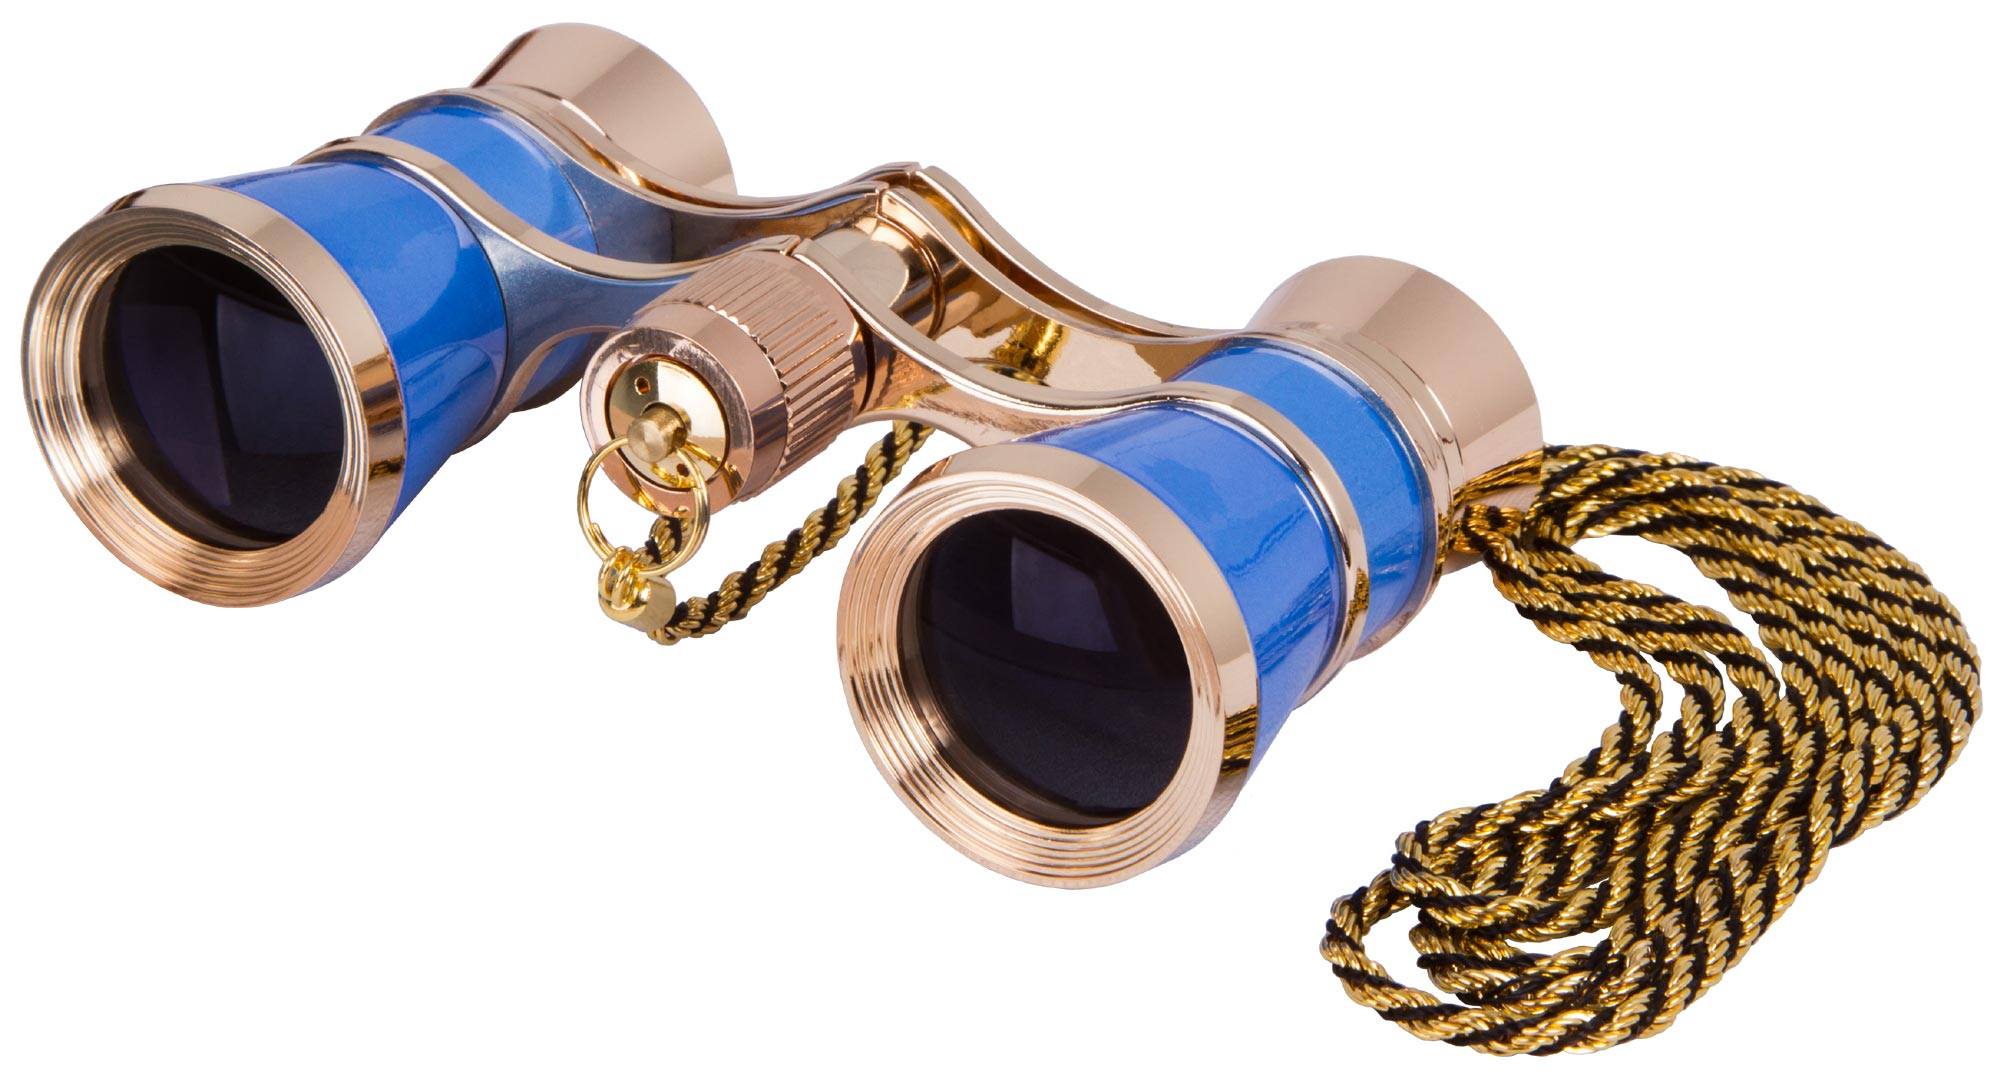 Levenhuk Broadway 325C Opera Glasses with Chain – Buy from the